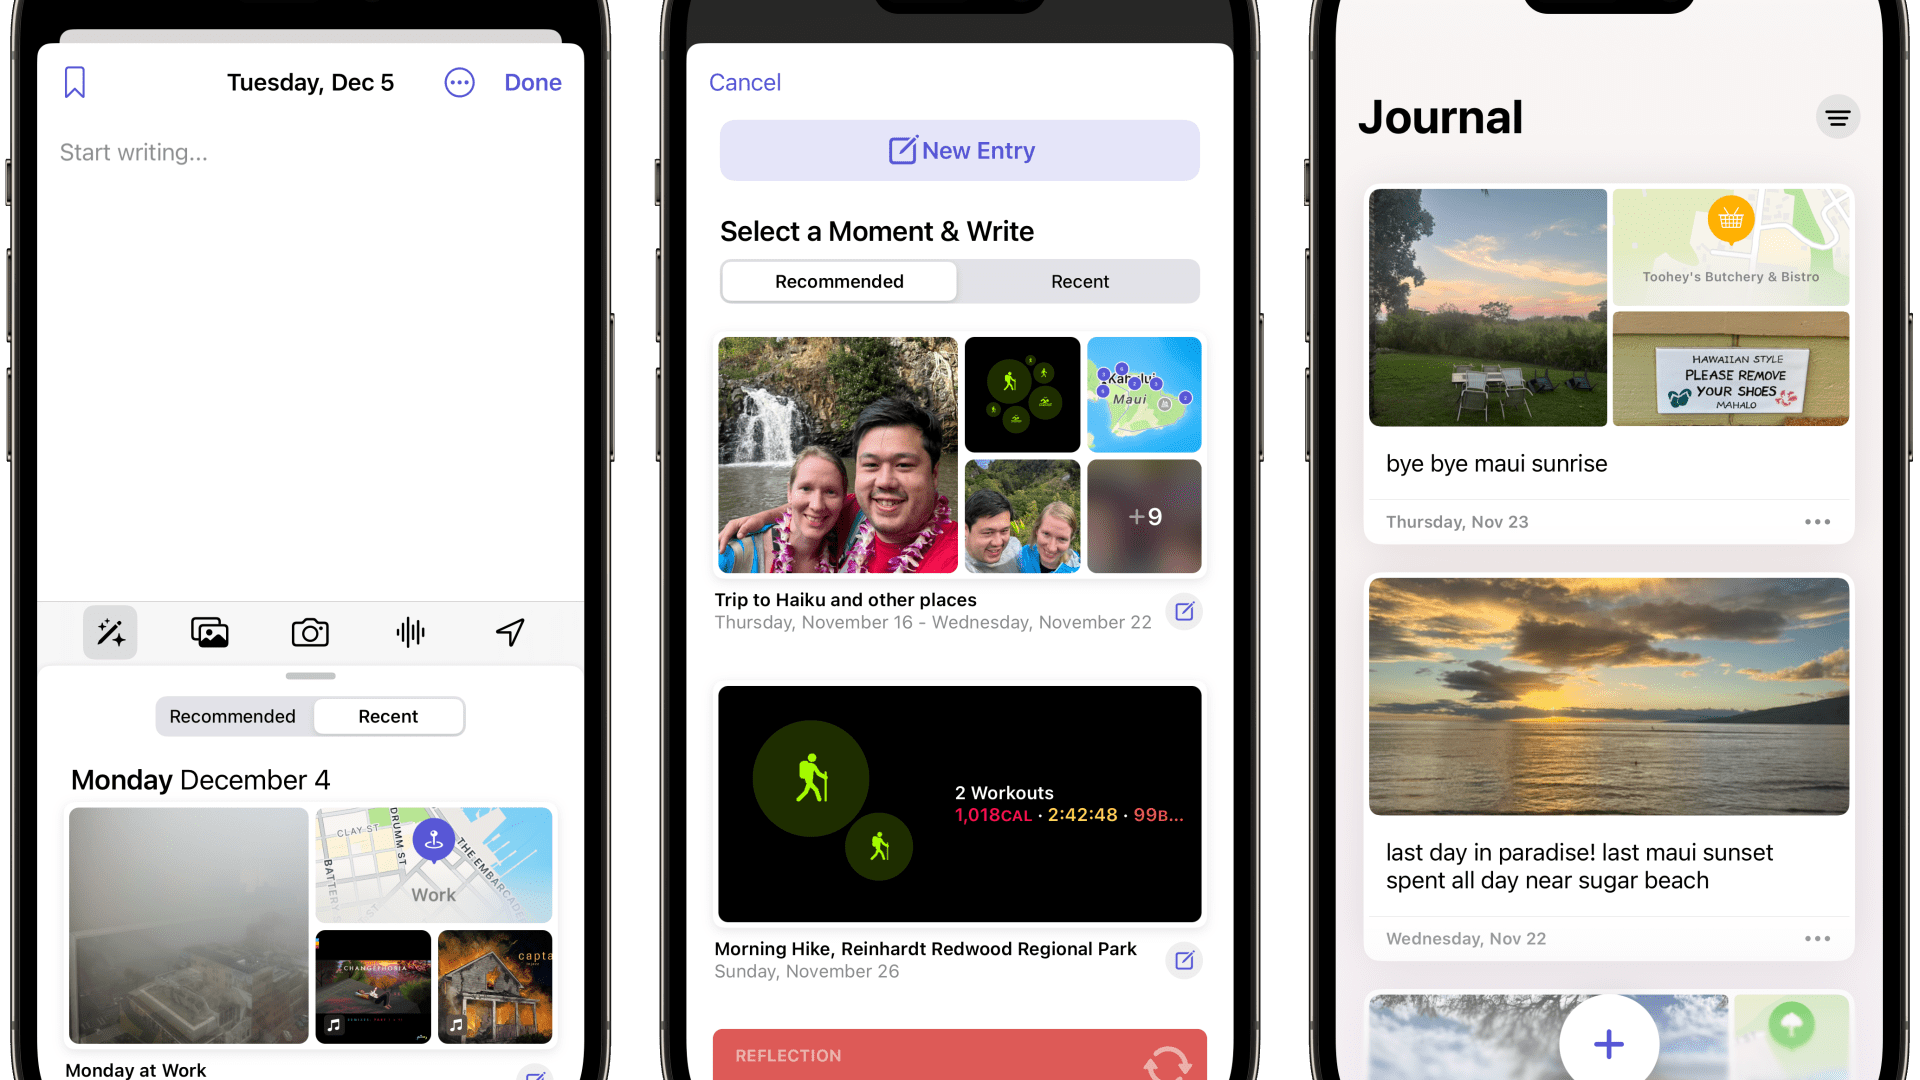 Apple's new Journal app uses machine learning to detect important events users might want to write about.